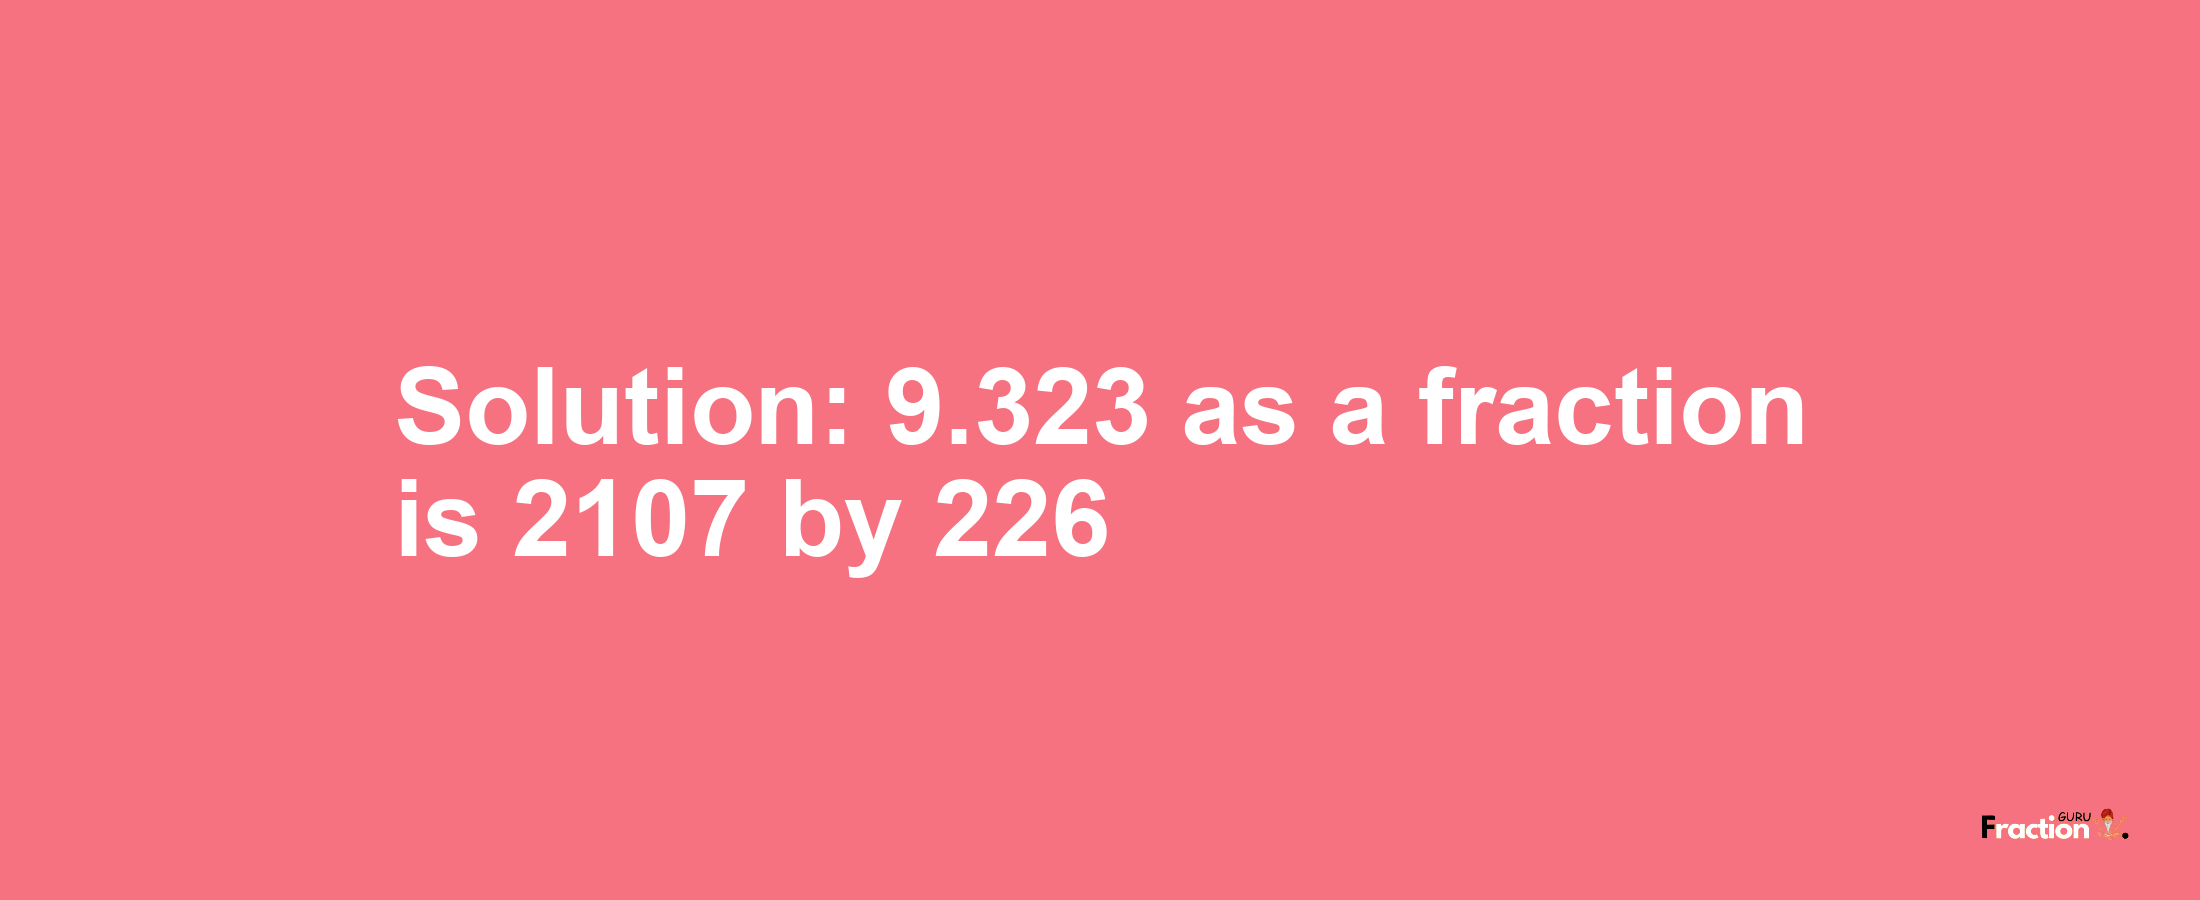 Solution:9.323 as a fraction is 2107/226